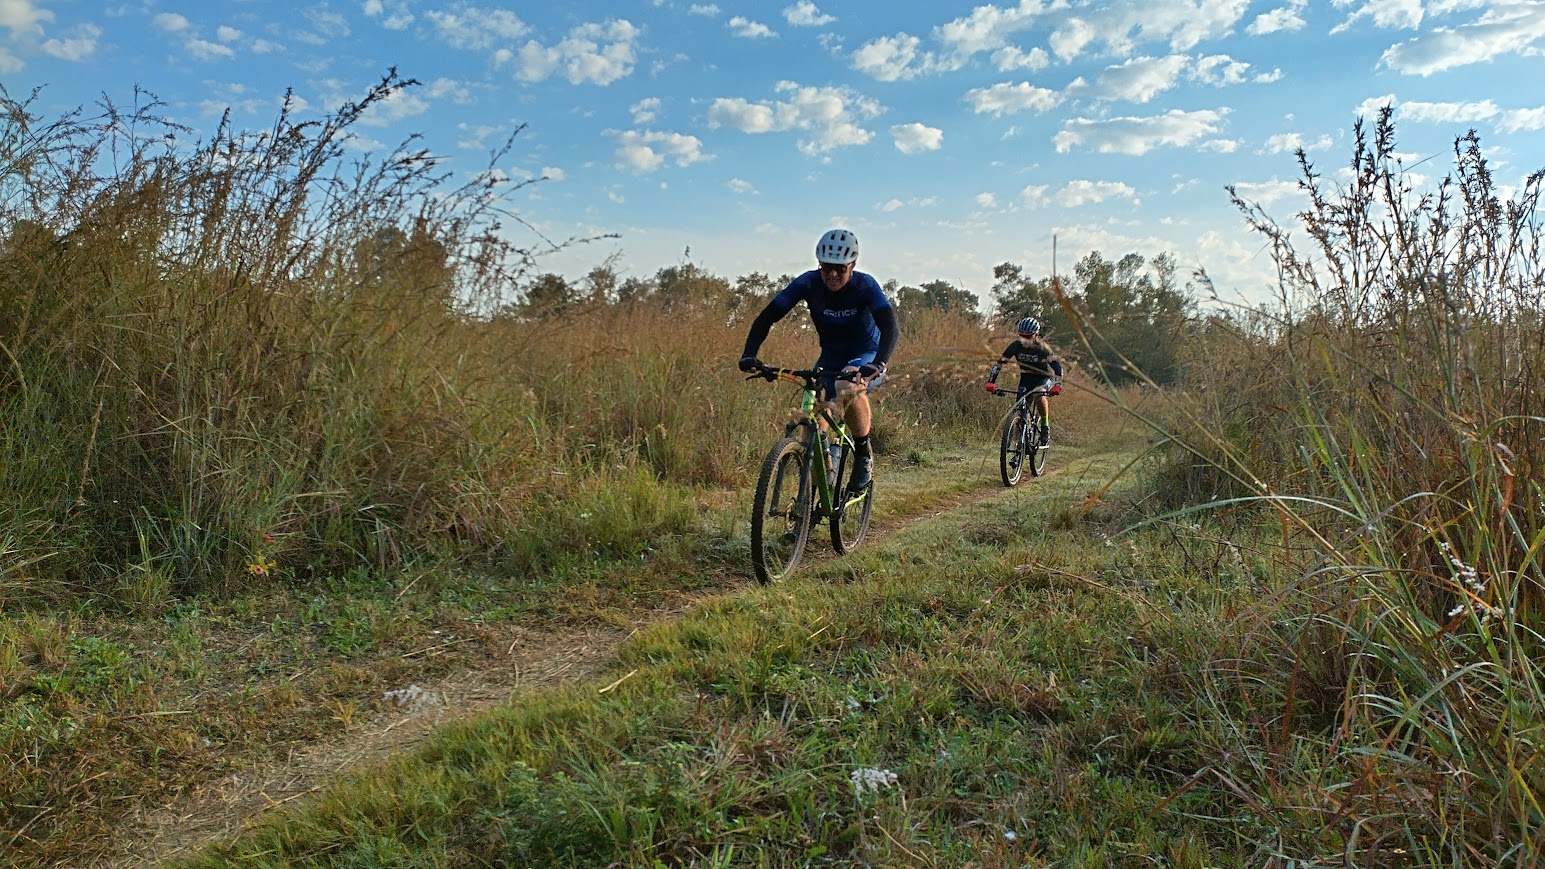 Mountain bike, trail run or hike with the family on Hazeldean Valley Trails among the cows.